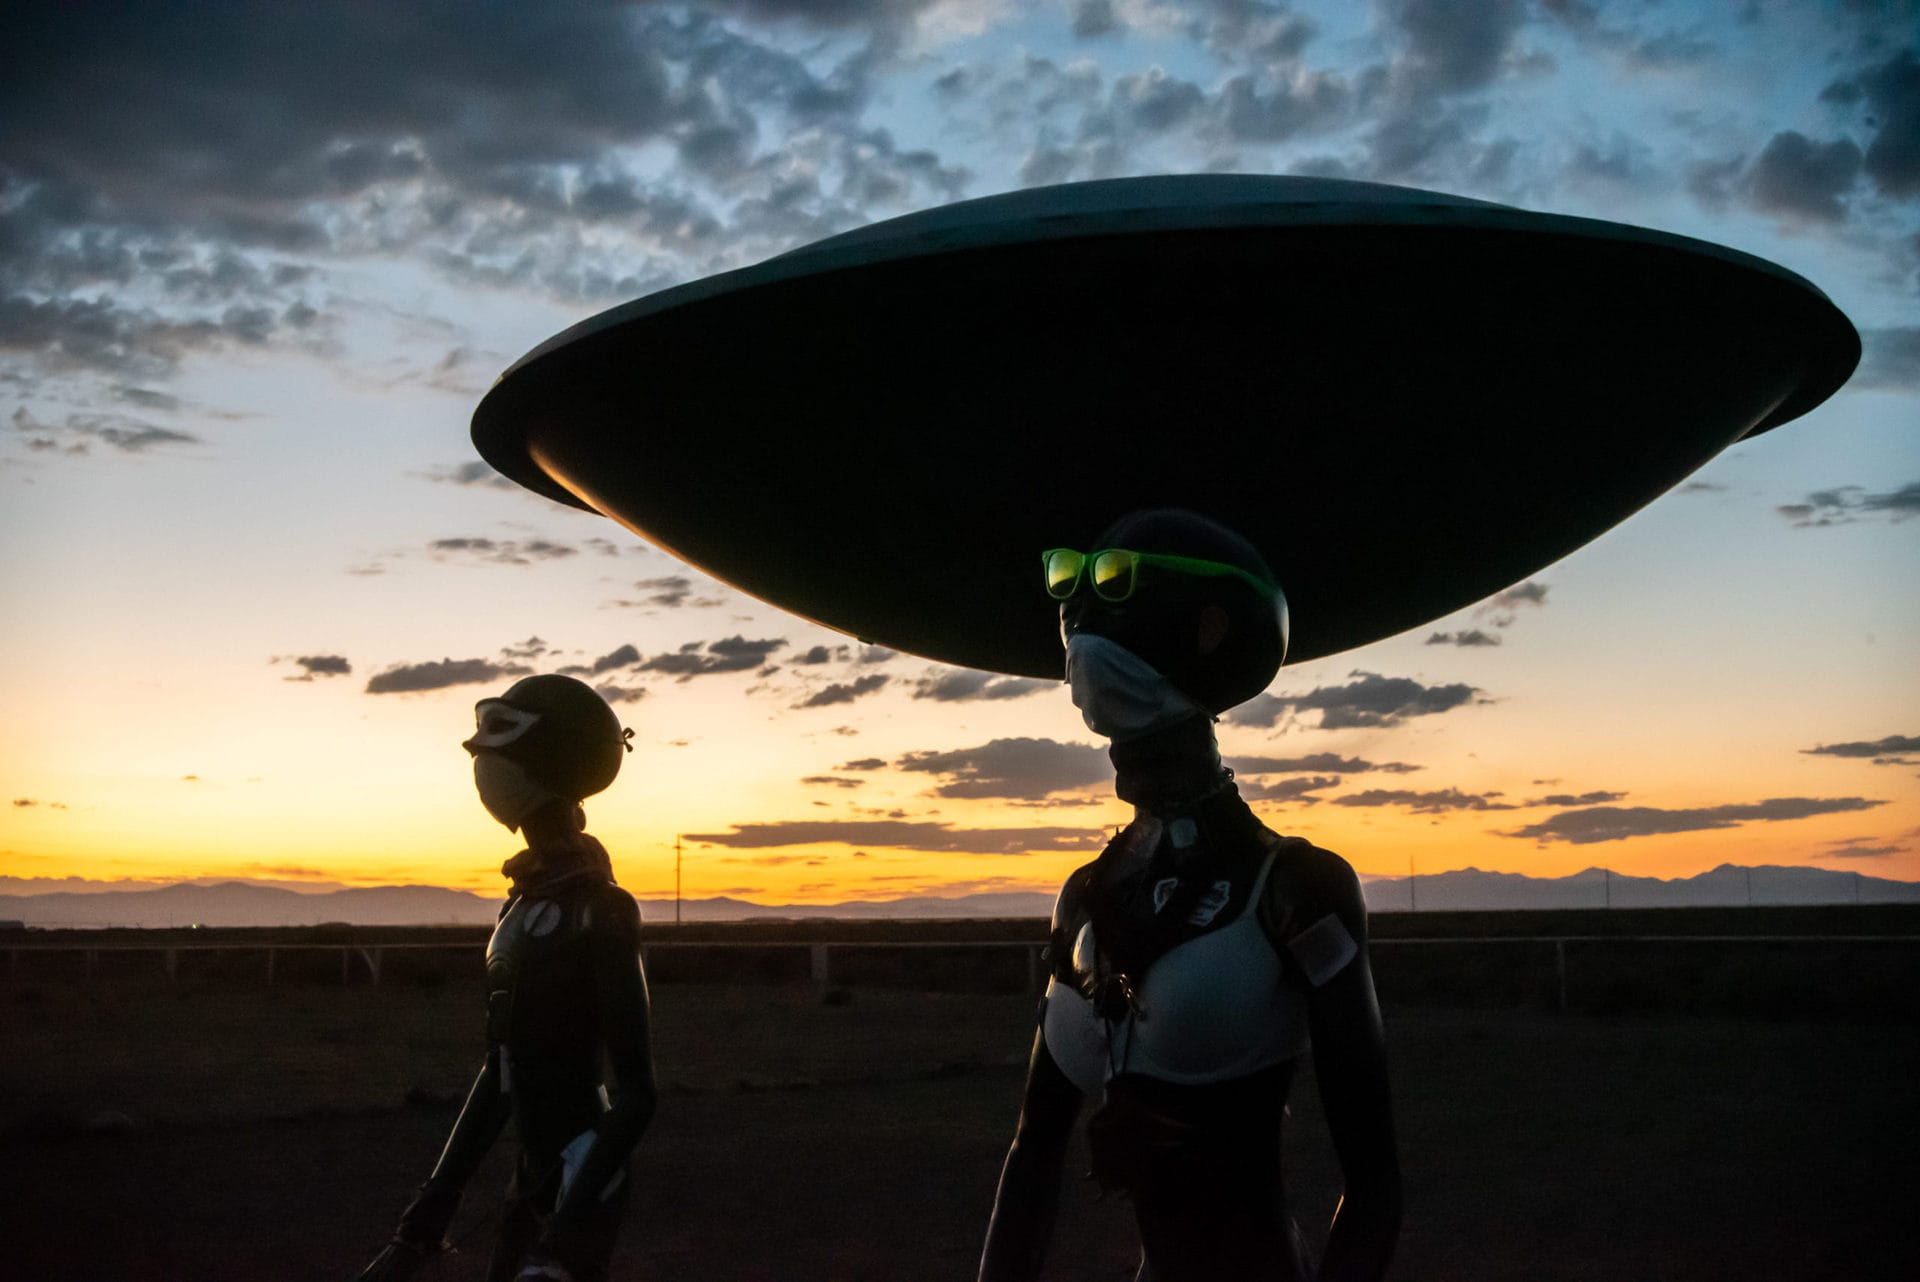 It started as a joke, but Colorado's UFO Watchtower is now a hotspot for  mysterious sightings - Roadtrippers